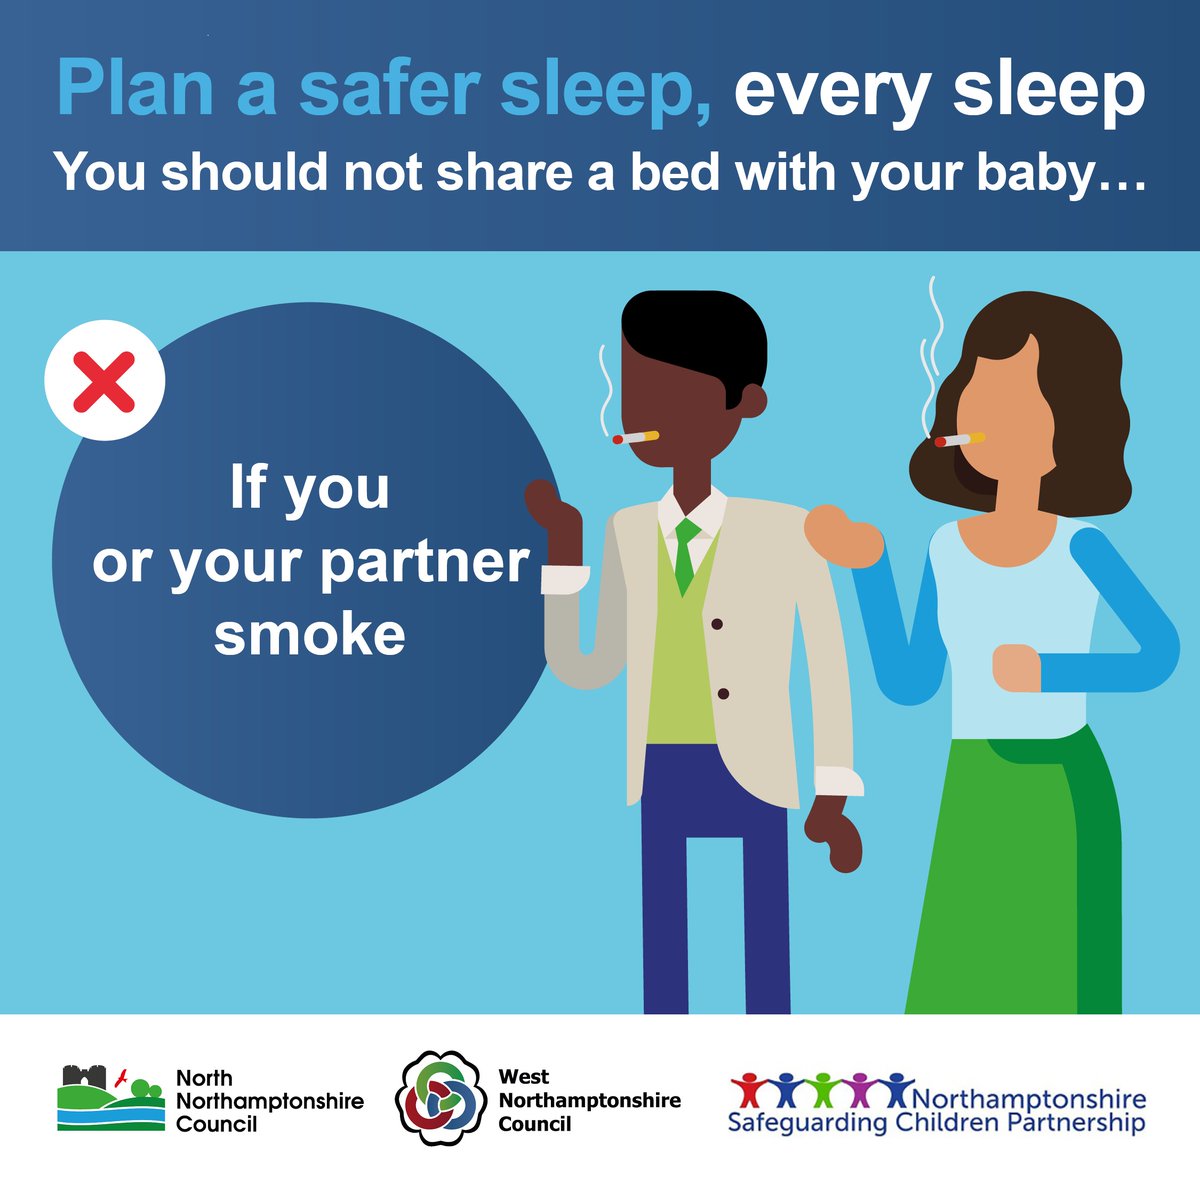 Smoking around your baby increases the risk of sudden unexpected infant death. It is always best to put baby in their own clear, flat separate sleep space, such as a cot or Moses basket in the same room as you. Visit the Lullaby Trust to find out more bit.ly/3uMzXkE